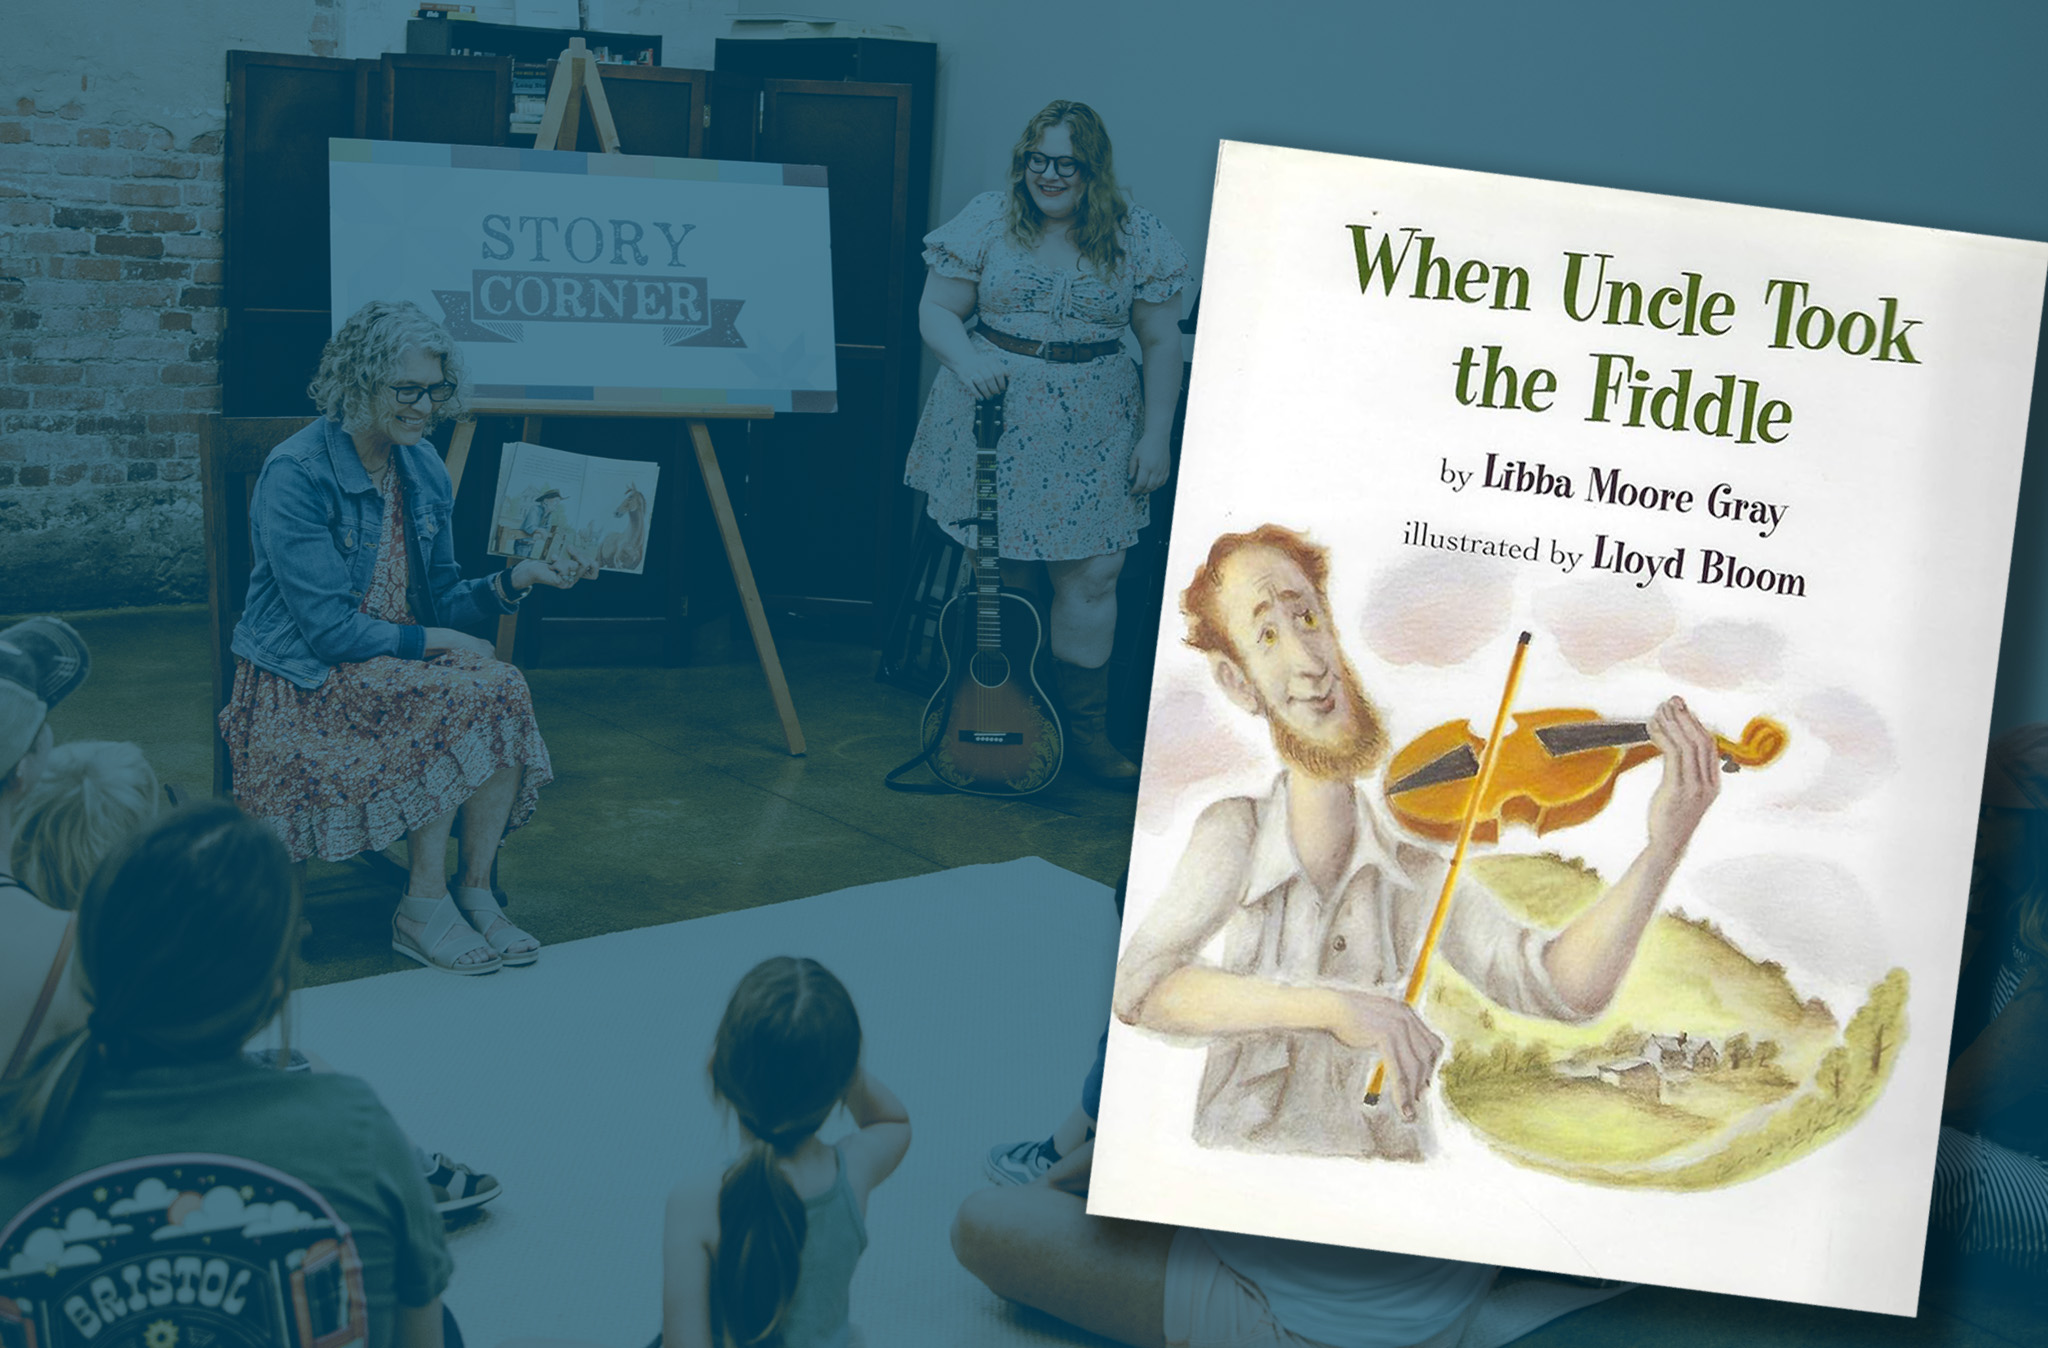 Graphic featuring the cover of the book When Uncle Took the Fiddle.